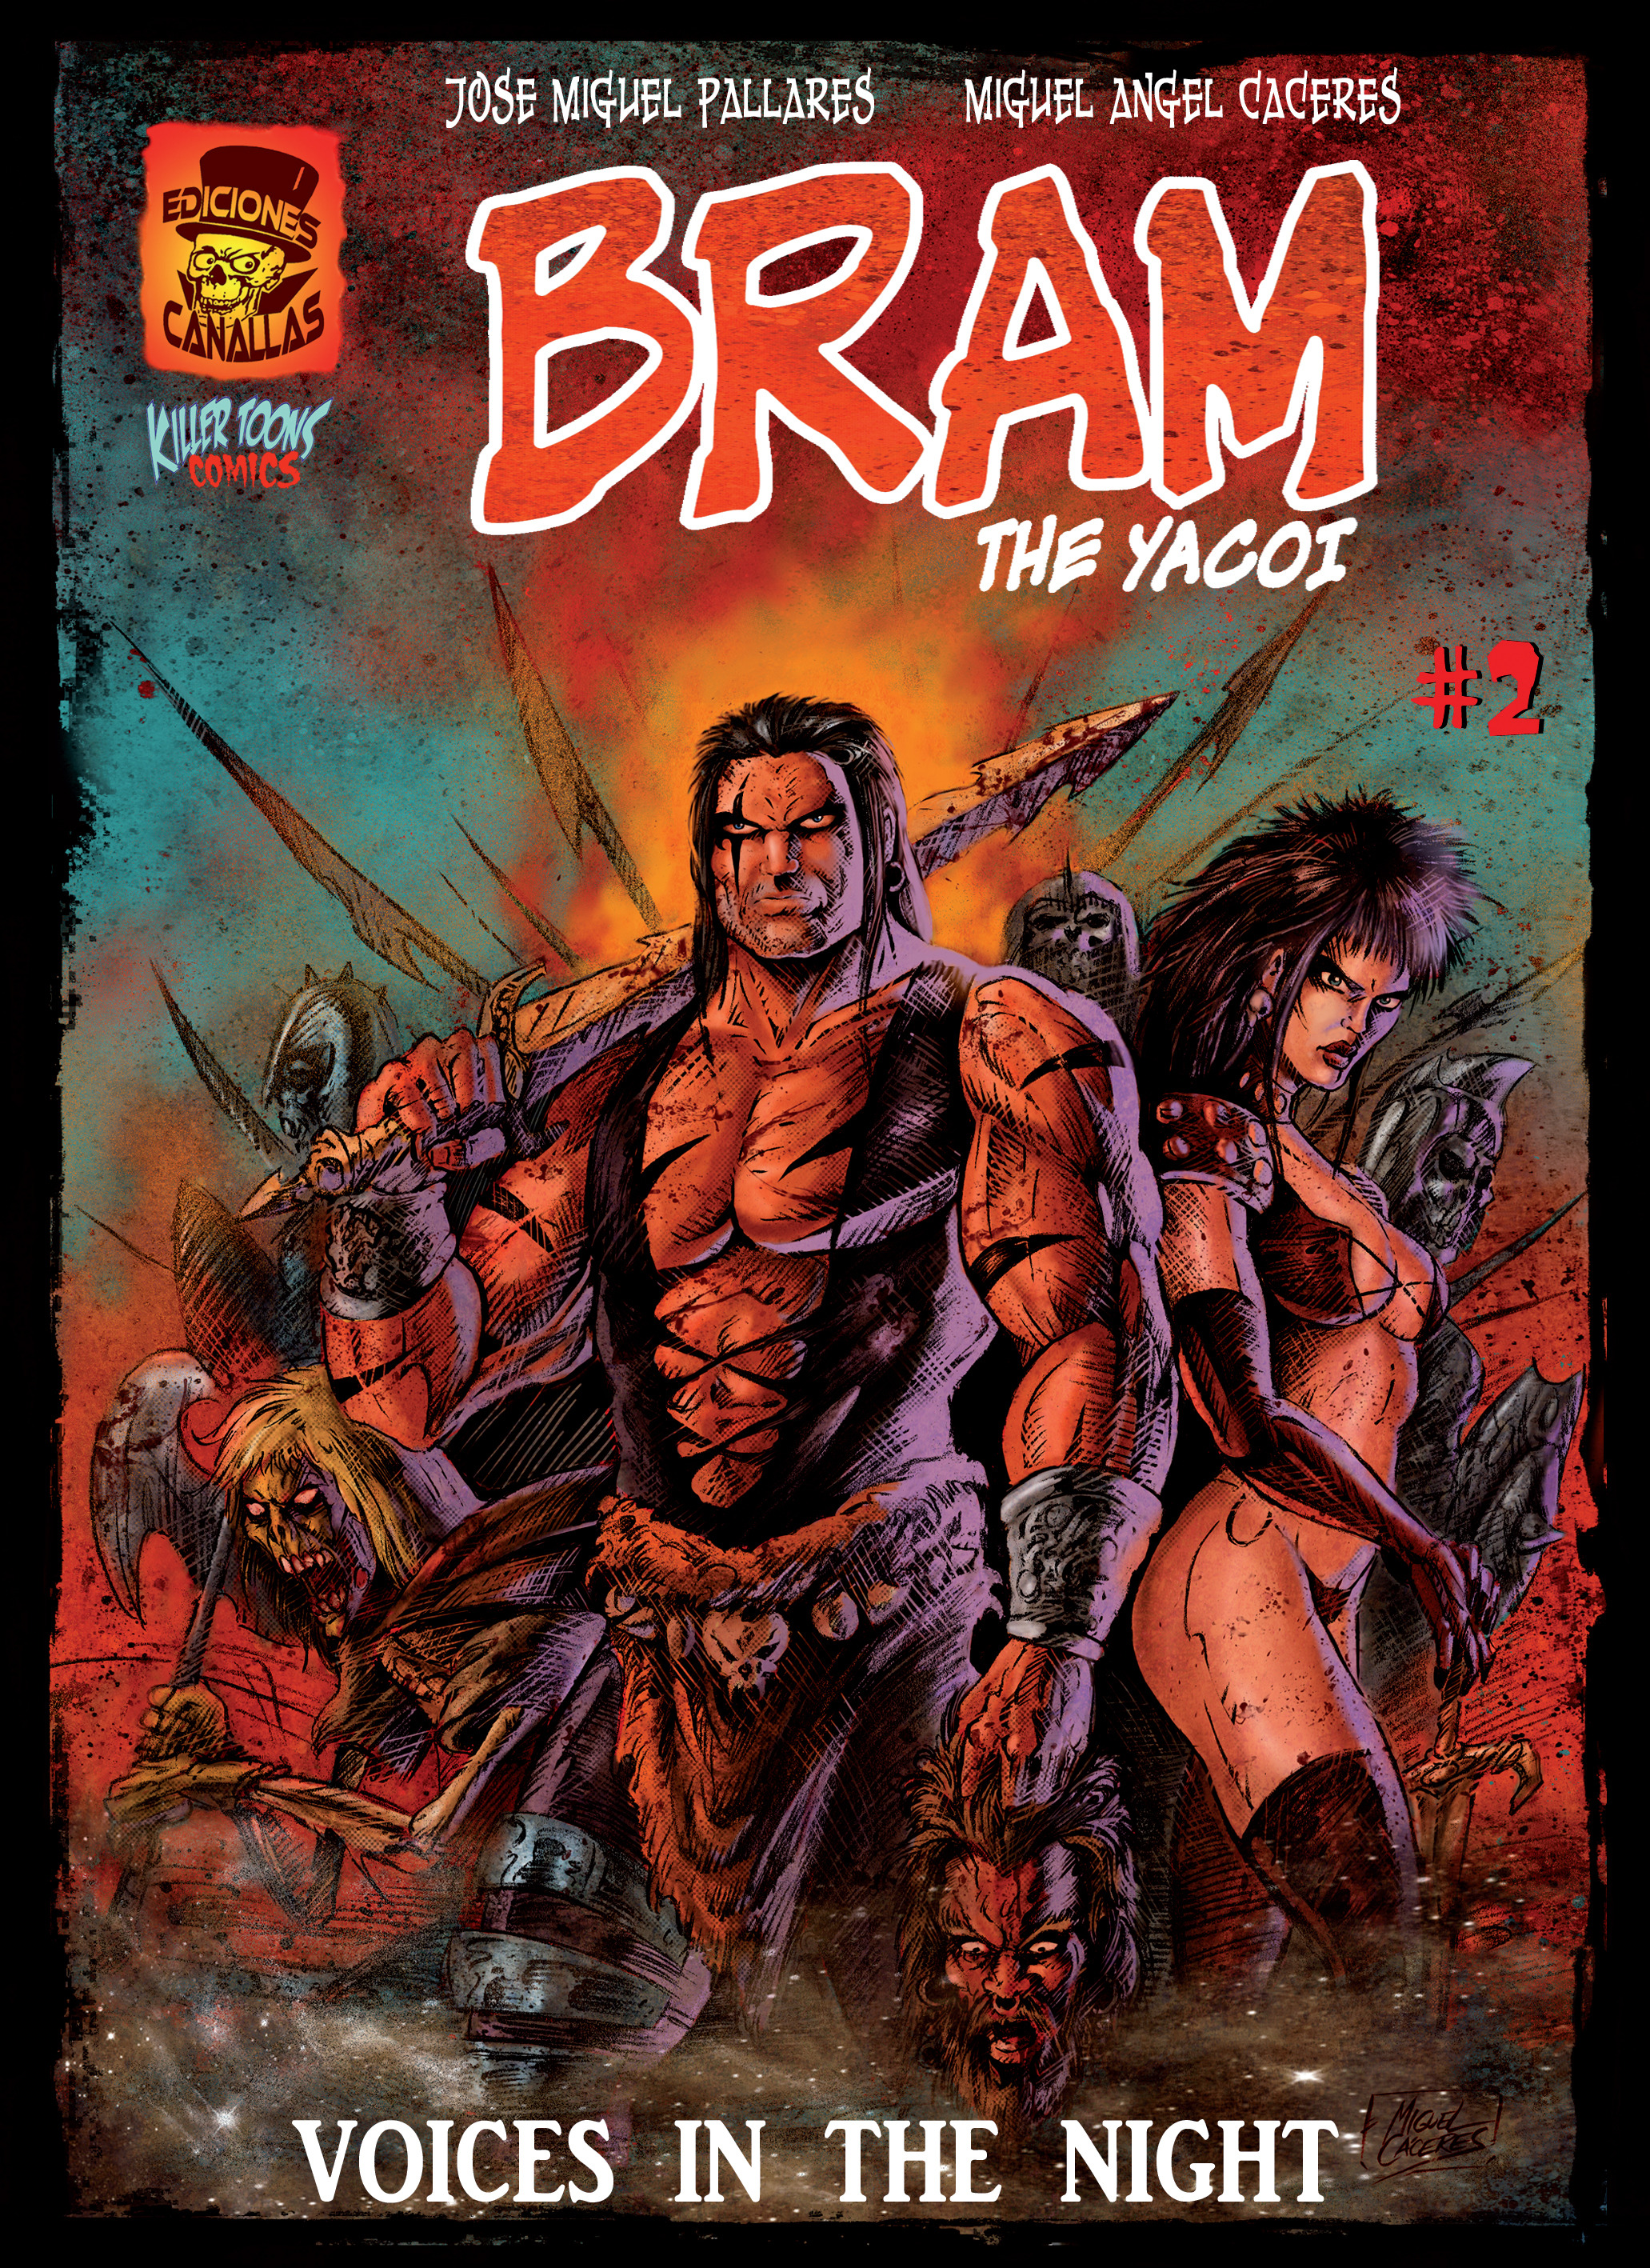 Read online Bram the Yacoi comic -  Issue #2 - 1